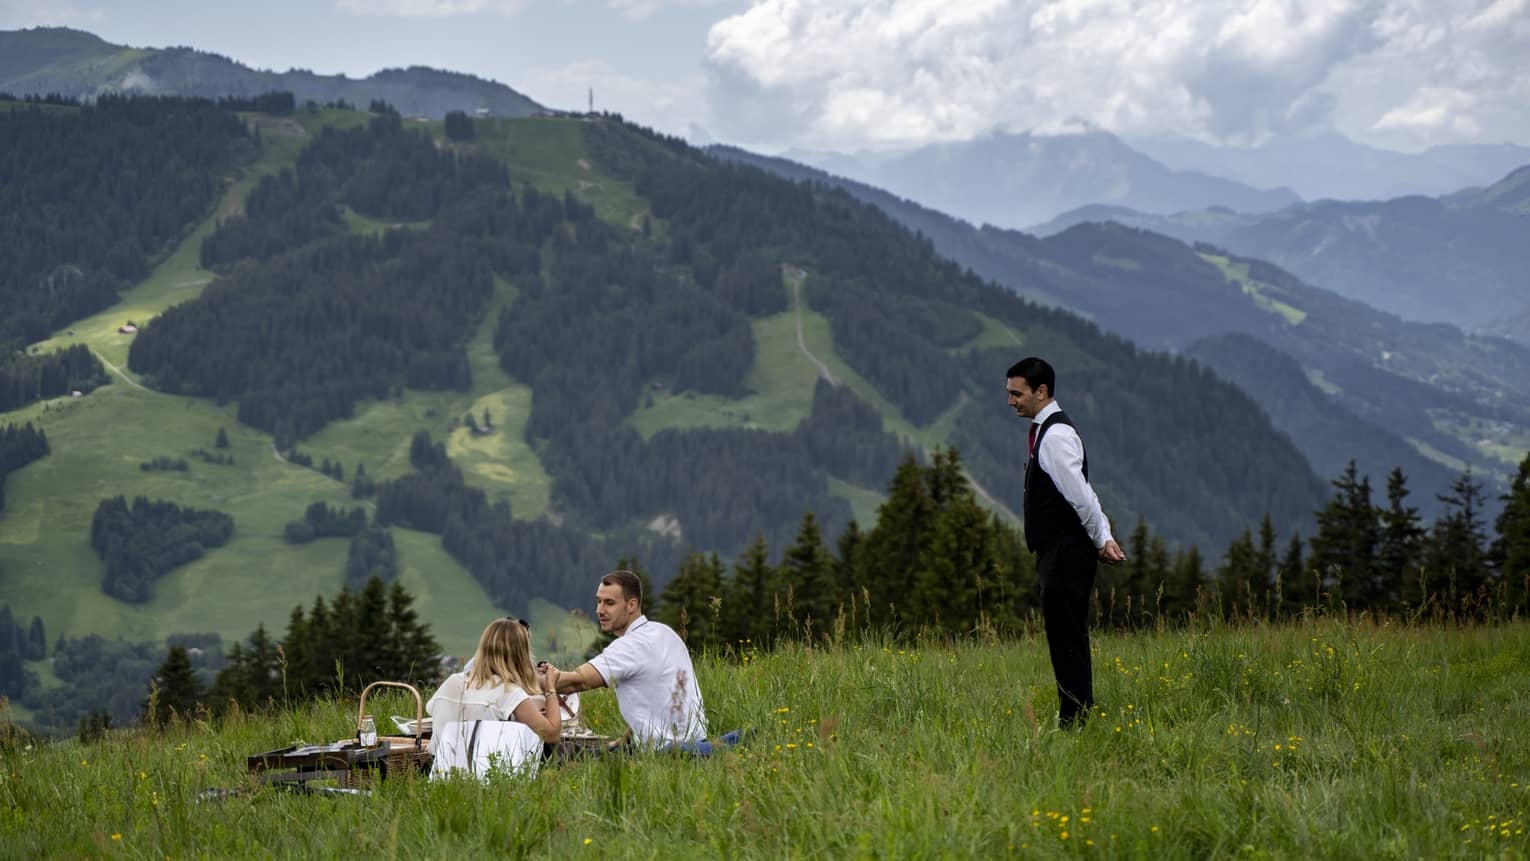 Man and woman sit on blanket with picnic on lush green mountainside, server assisting